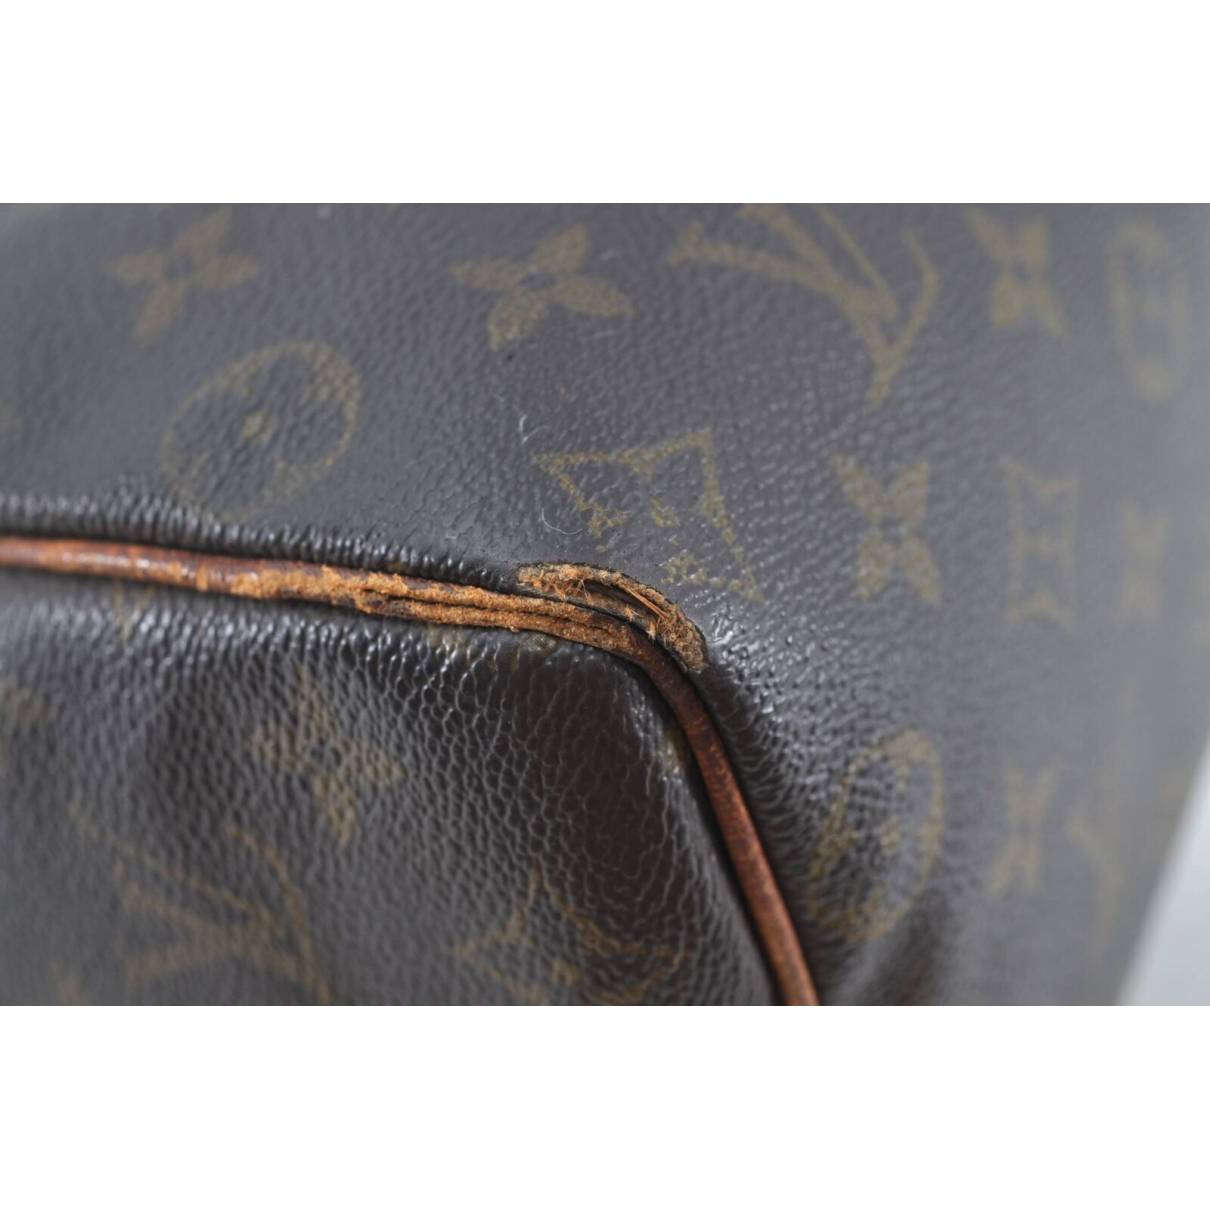 Speedy doctor 25 leather handbag Louis Vuitton Brown in Leather - 29473073